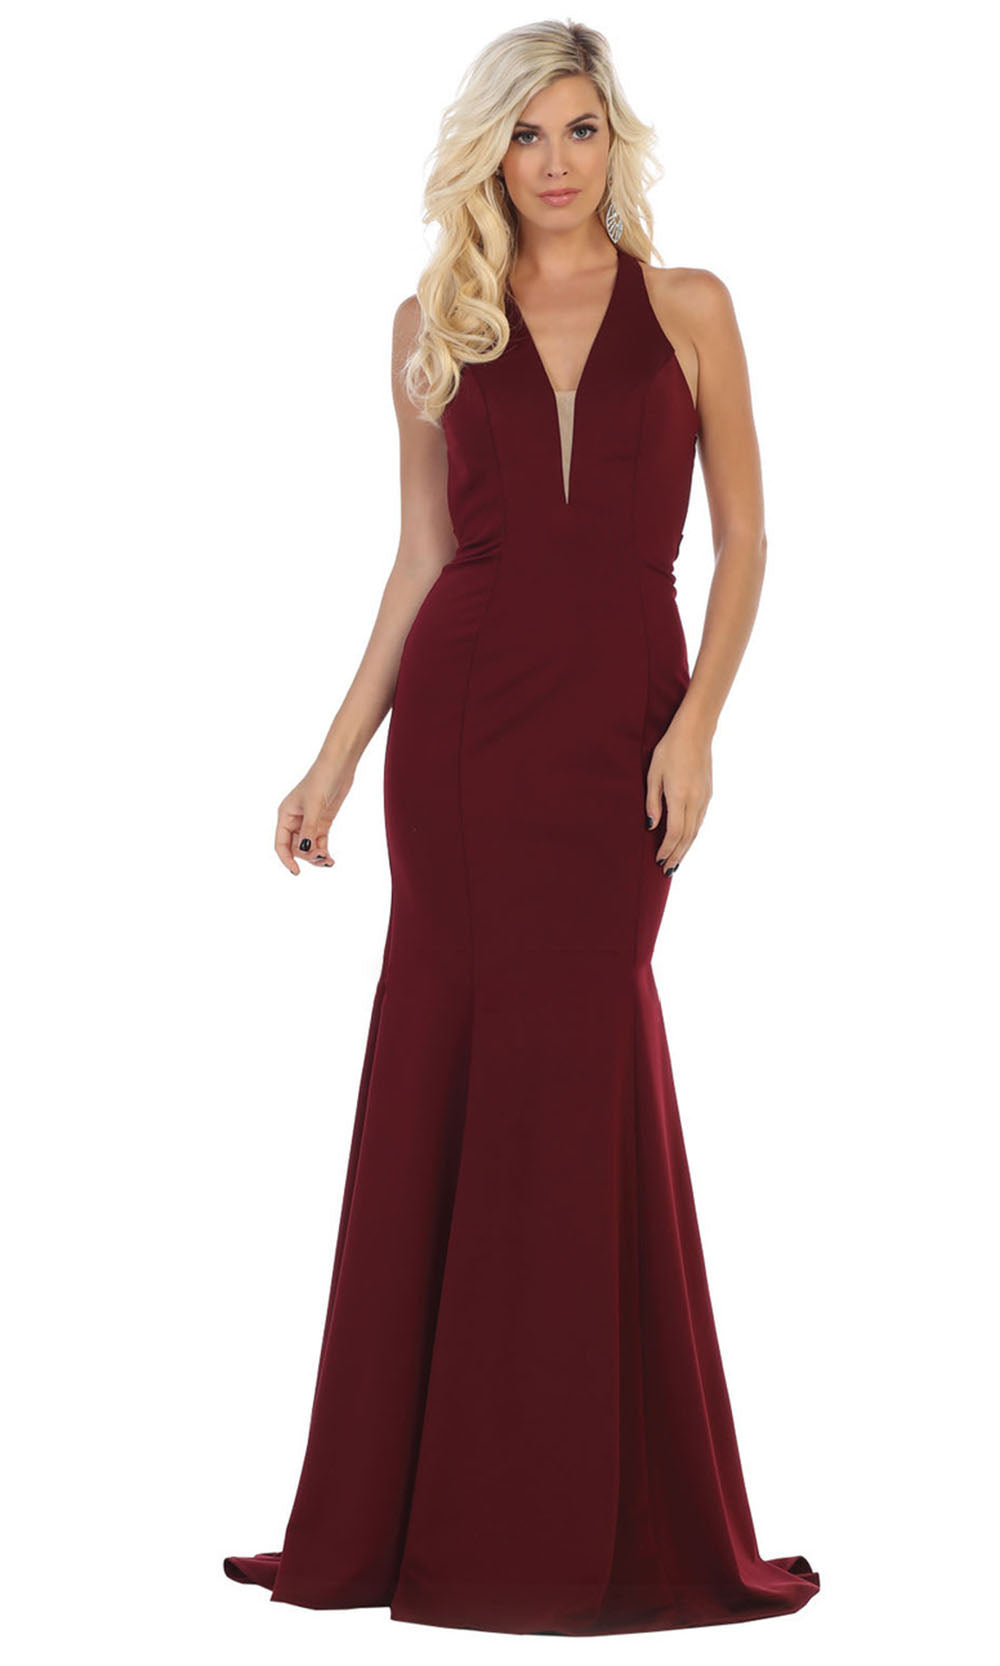 May Queen - MQ1636 Deep V Neck Long Sheath Dress In Red